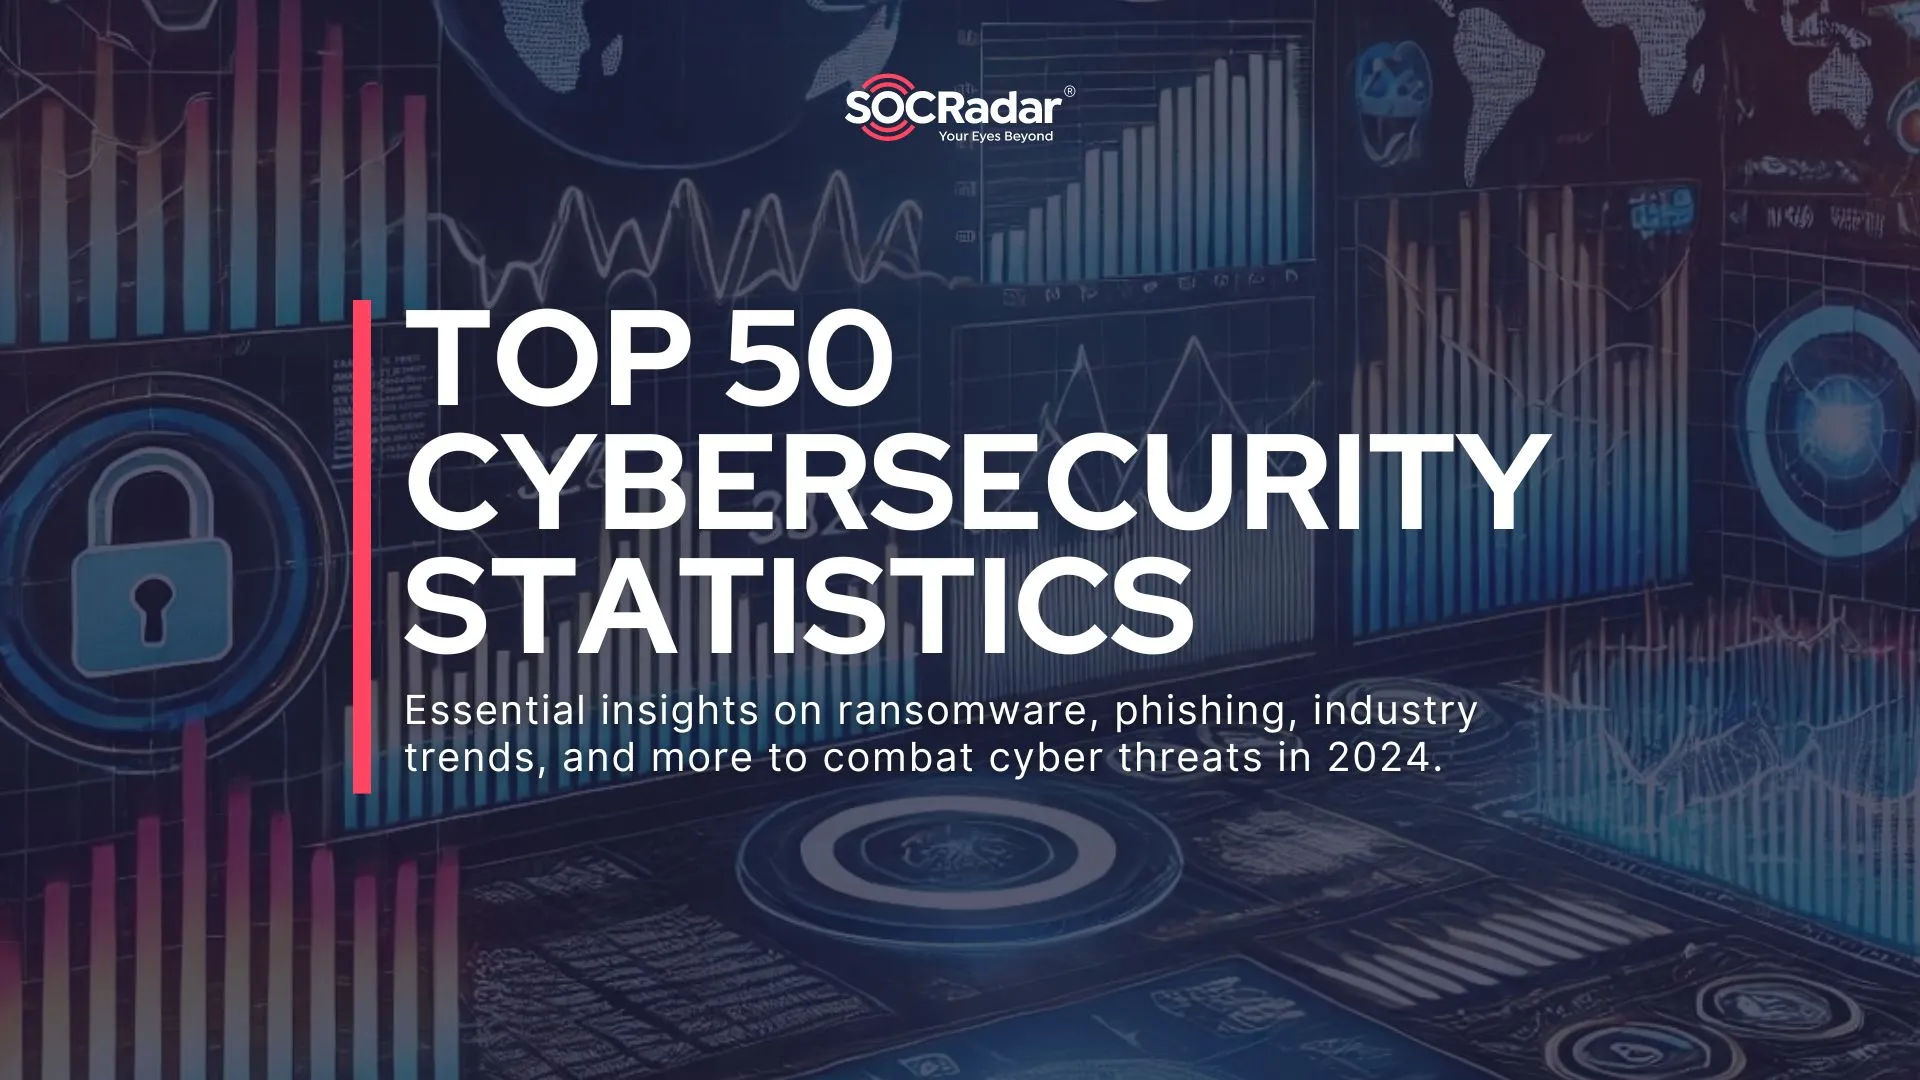 SOCRadar® Cyber Intelligence Inc. | Top 50 Cybersecurity Statistics in 2024 (Essential Insights on Ransomware, Phishing, Industry Trends, and More)